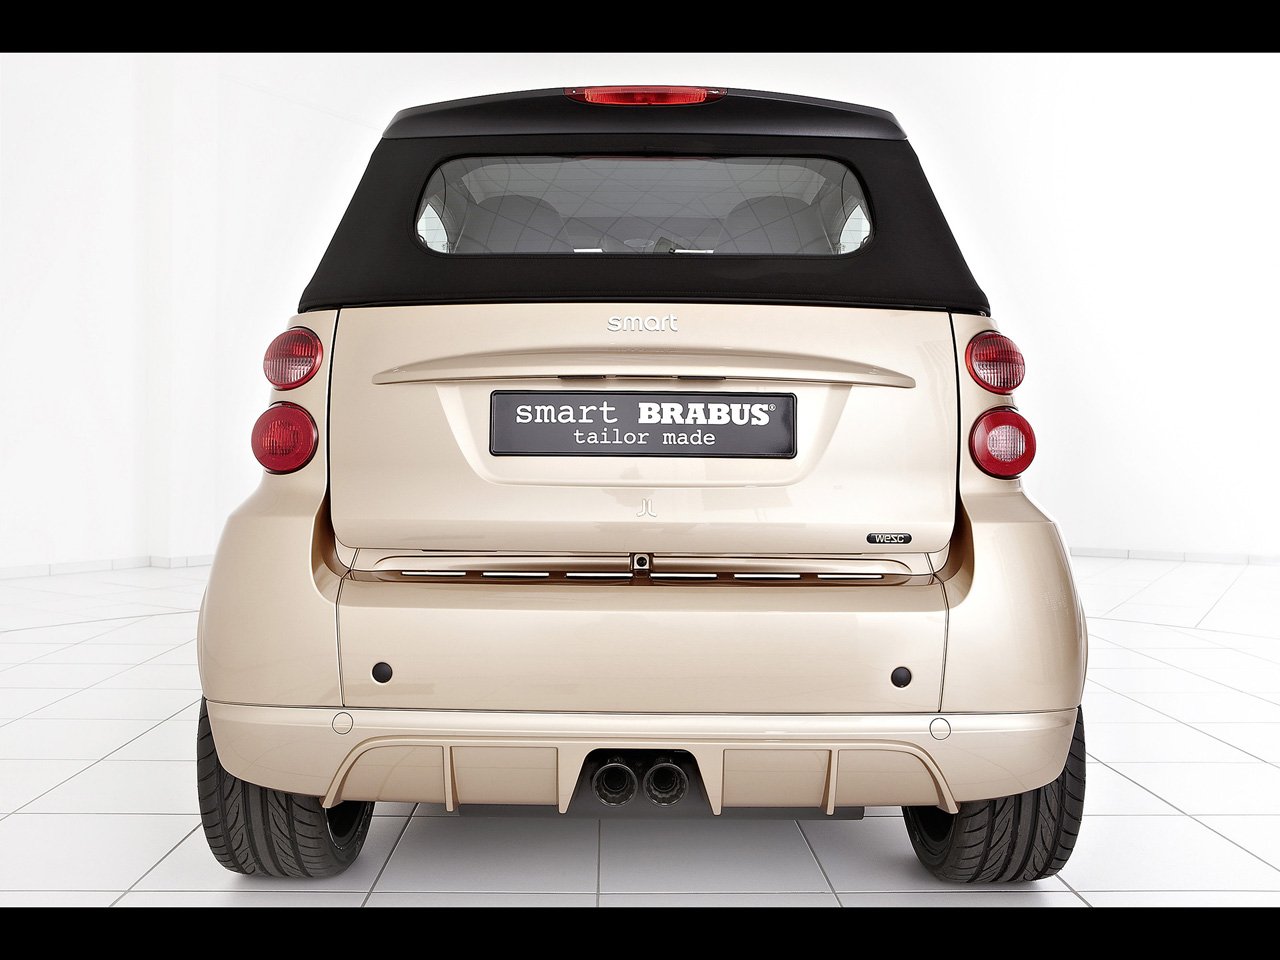 2012 smart Brabus tailor made by WeSC